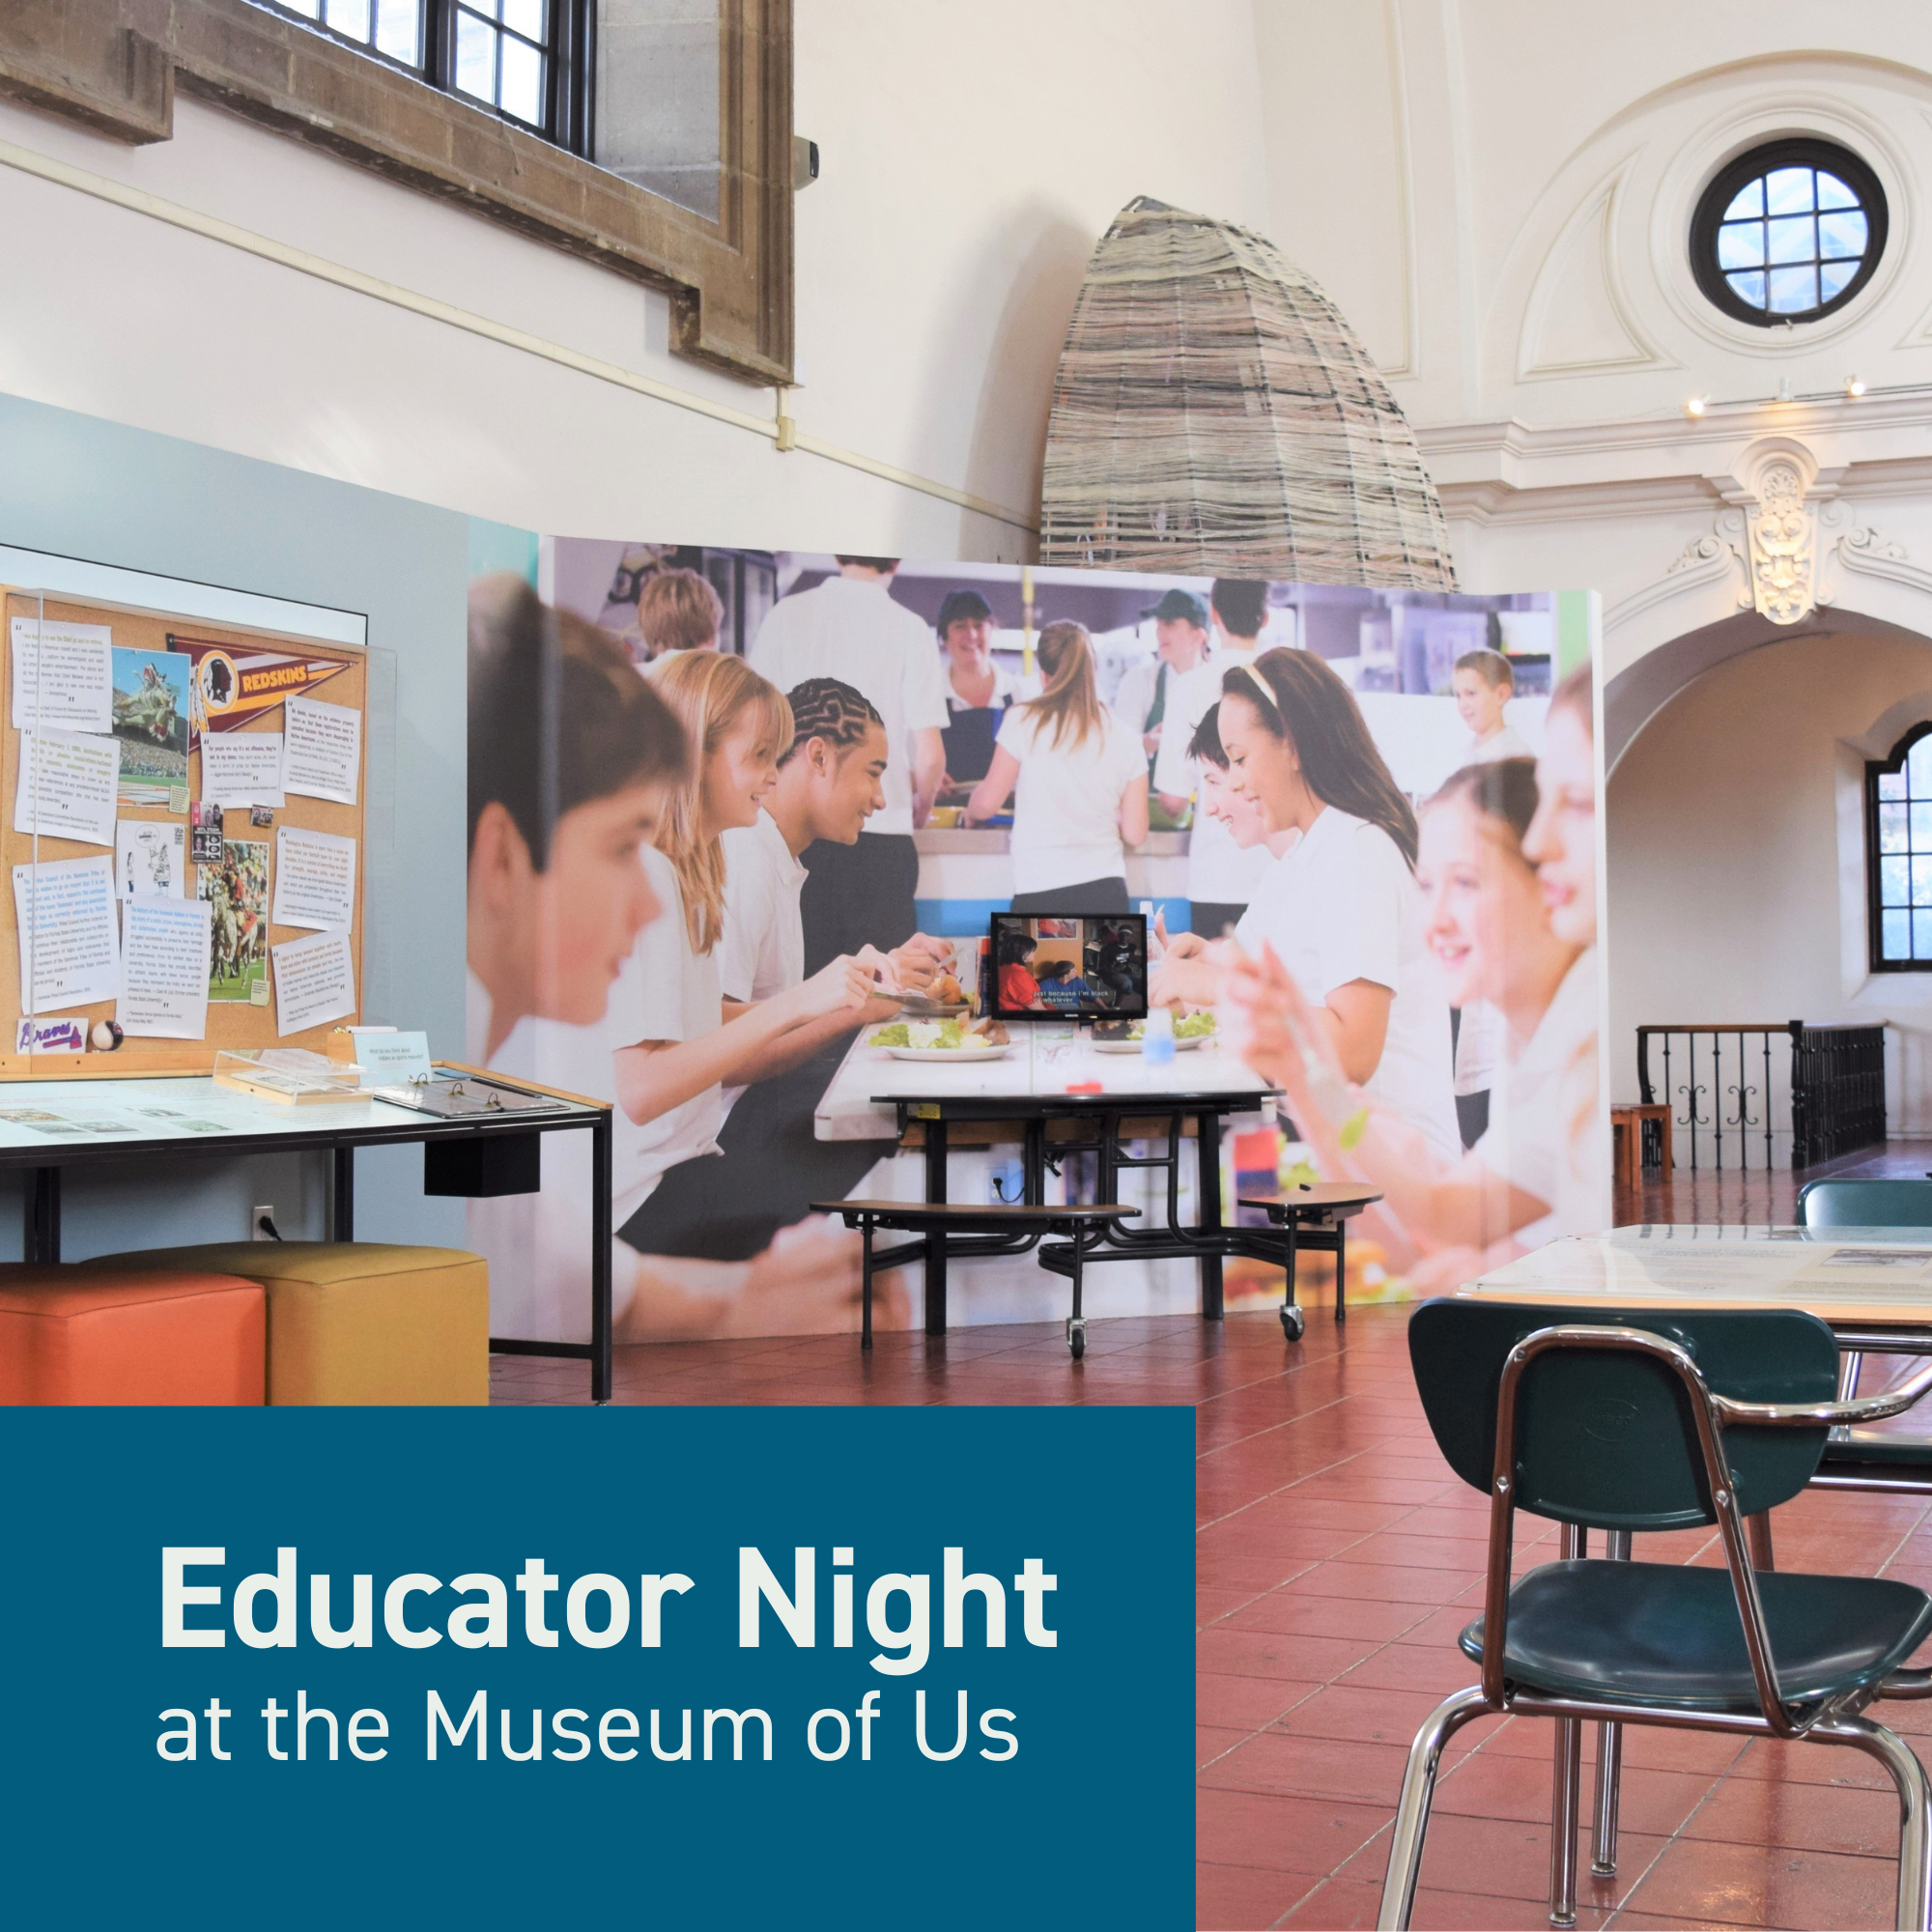 This image features a photo of the Race: Are We So Different? exhibition, with a small graphically design blue rectangle in the bottom left corner with white text that says "Educator Night at the Museum of Us" In the photo, we see exhibits that cover topics like types of mascots, the education system, and identity. On the left, there's an exhibit about school and sports mascots with examples. The other exhibits in the picture include two classroom desks facing each other with content on the tabletop of the desks, a school lunch table with a monitor that plays videos of people discussing race and identity.